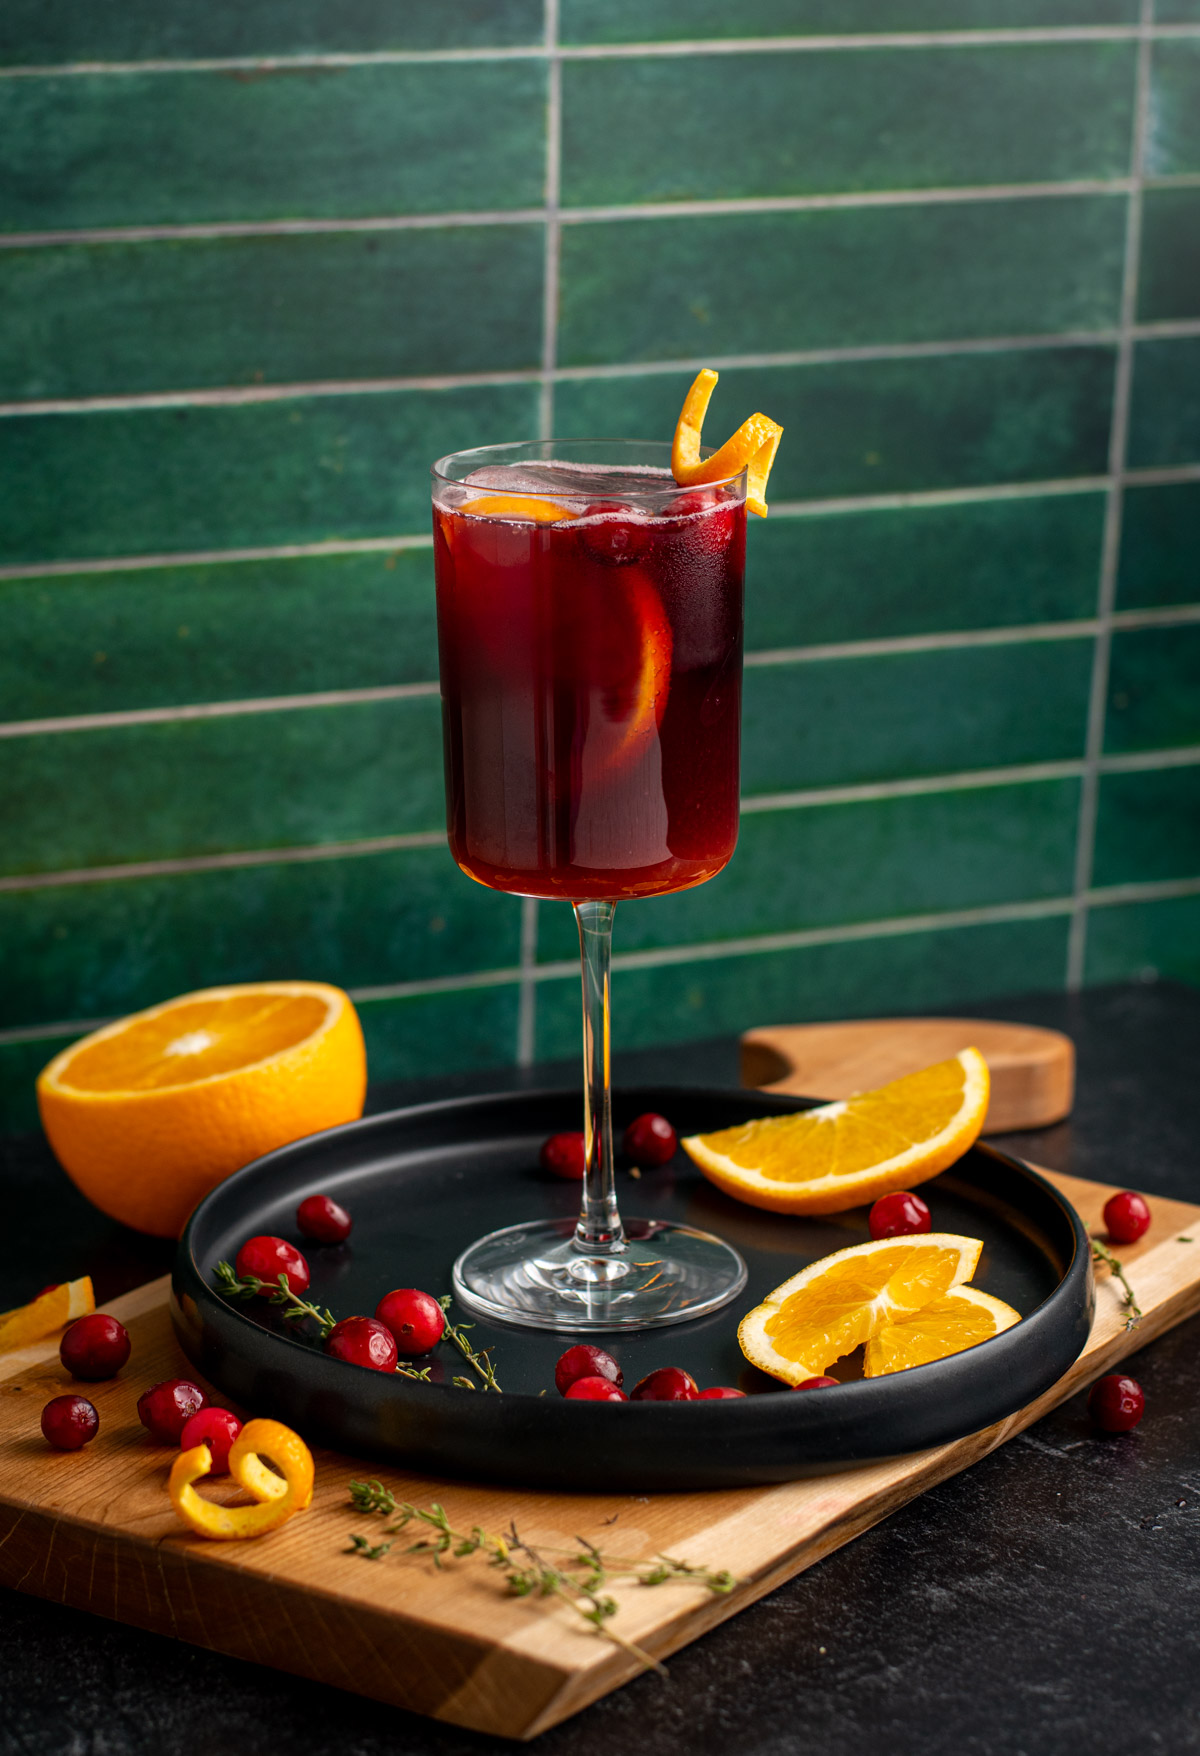 lambrusco spritz on a black plate with orange slices around and a green tile background.